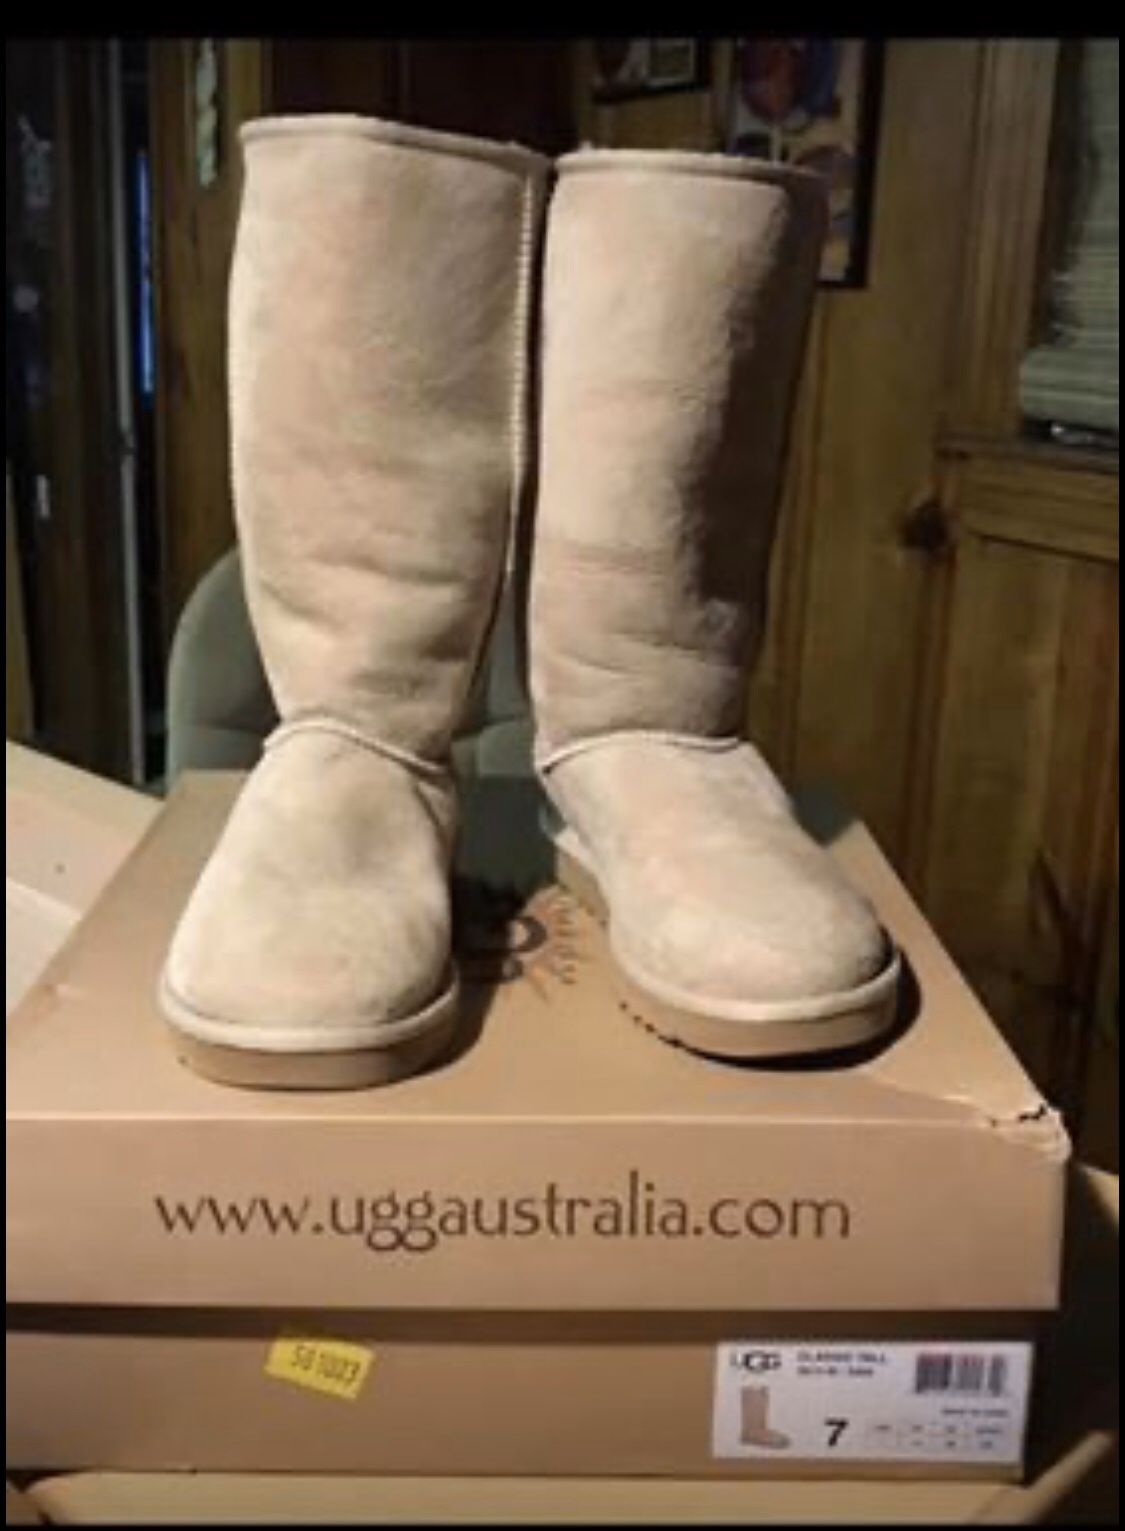 Boots for Women’s brand UGG size 7